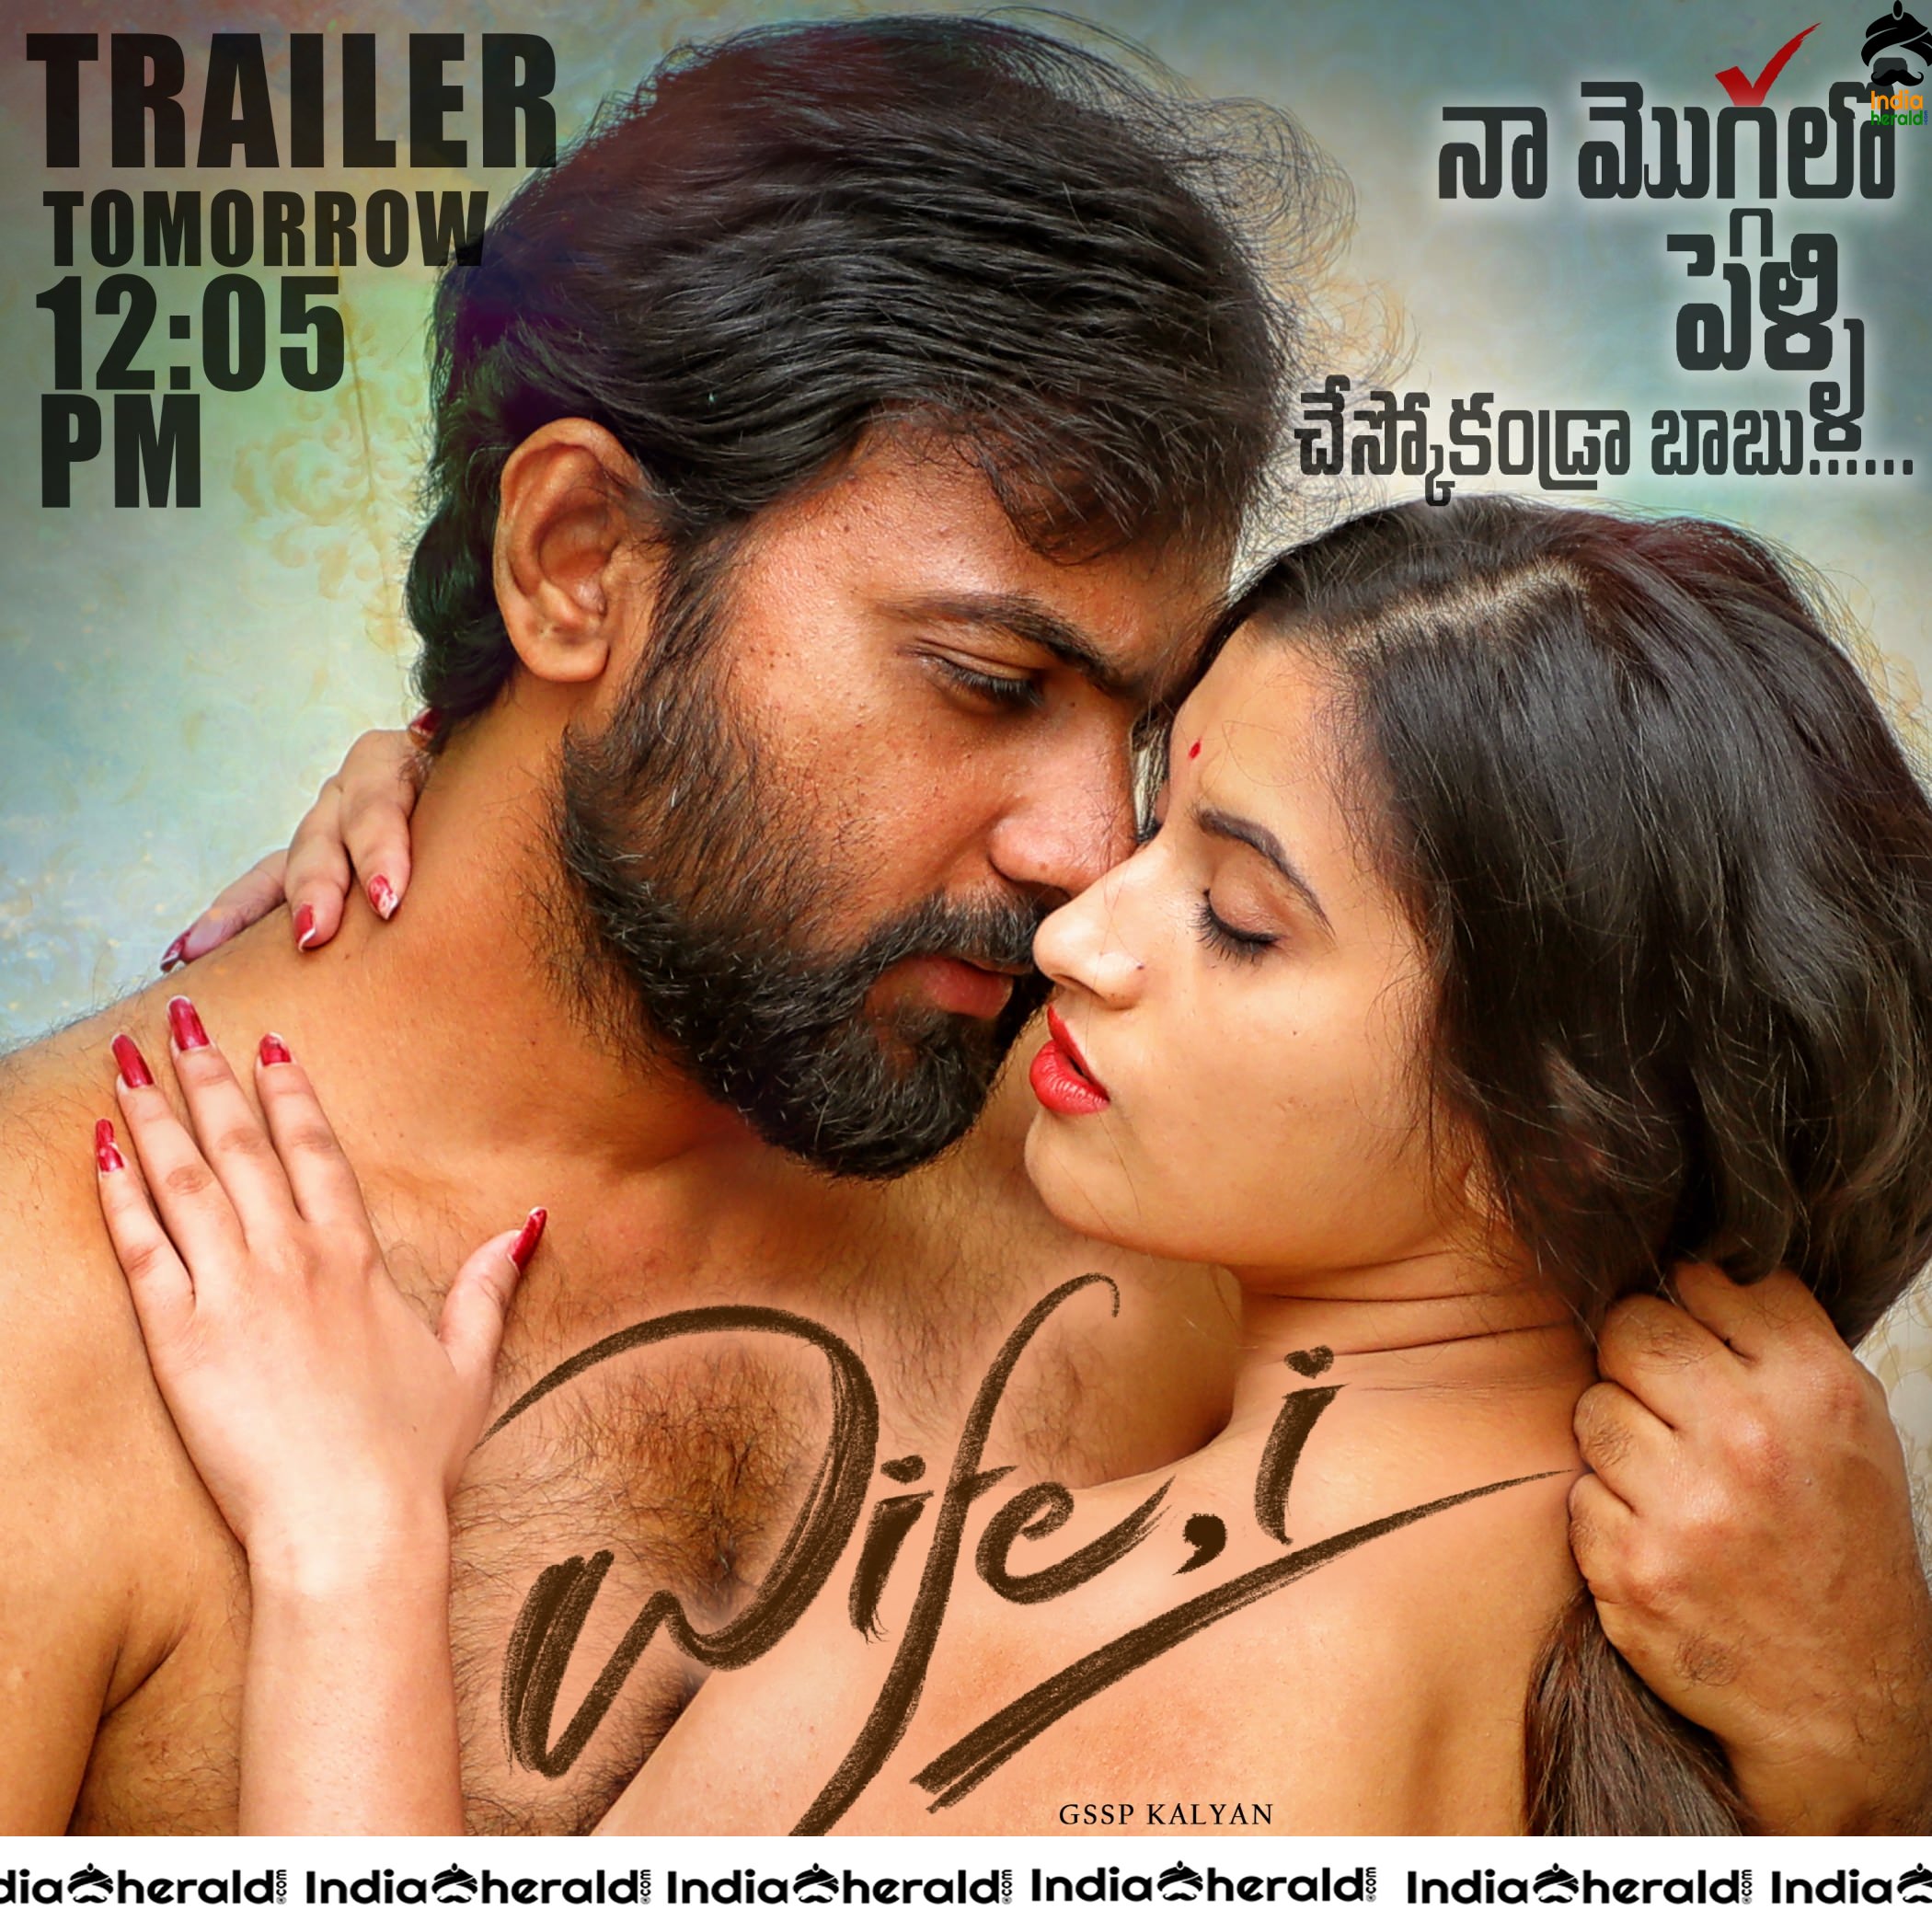 Wife I movie Latest Hot Posters